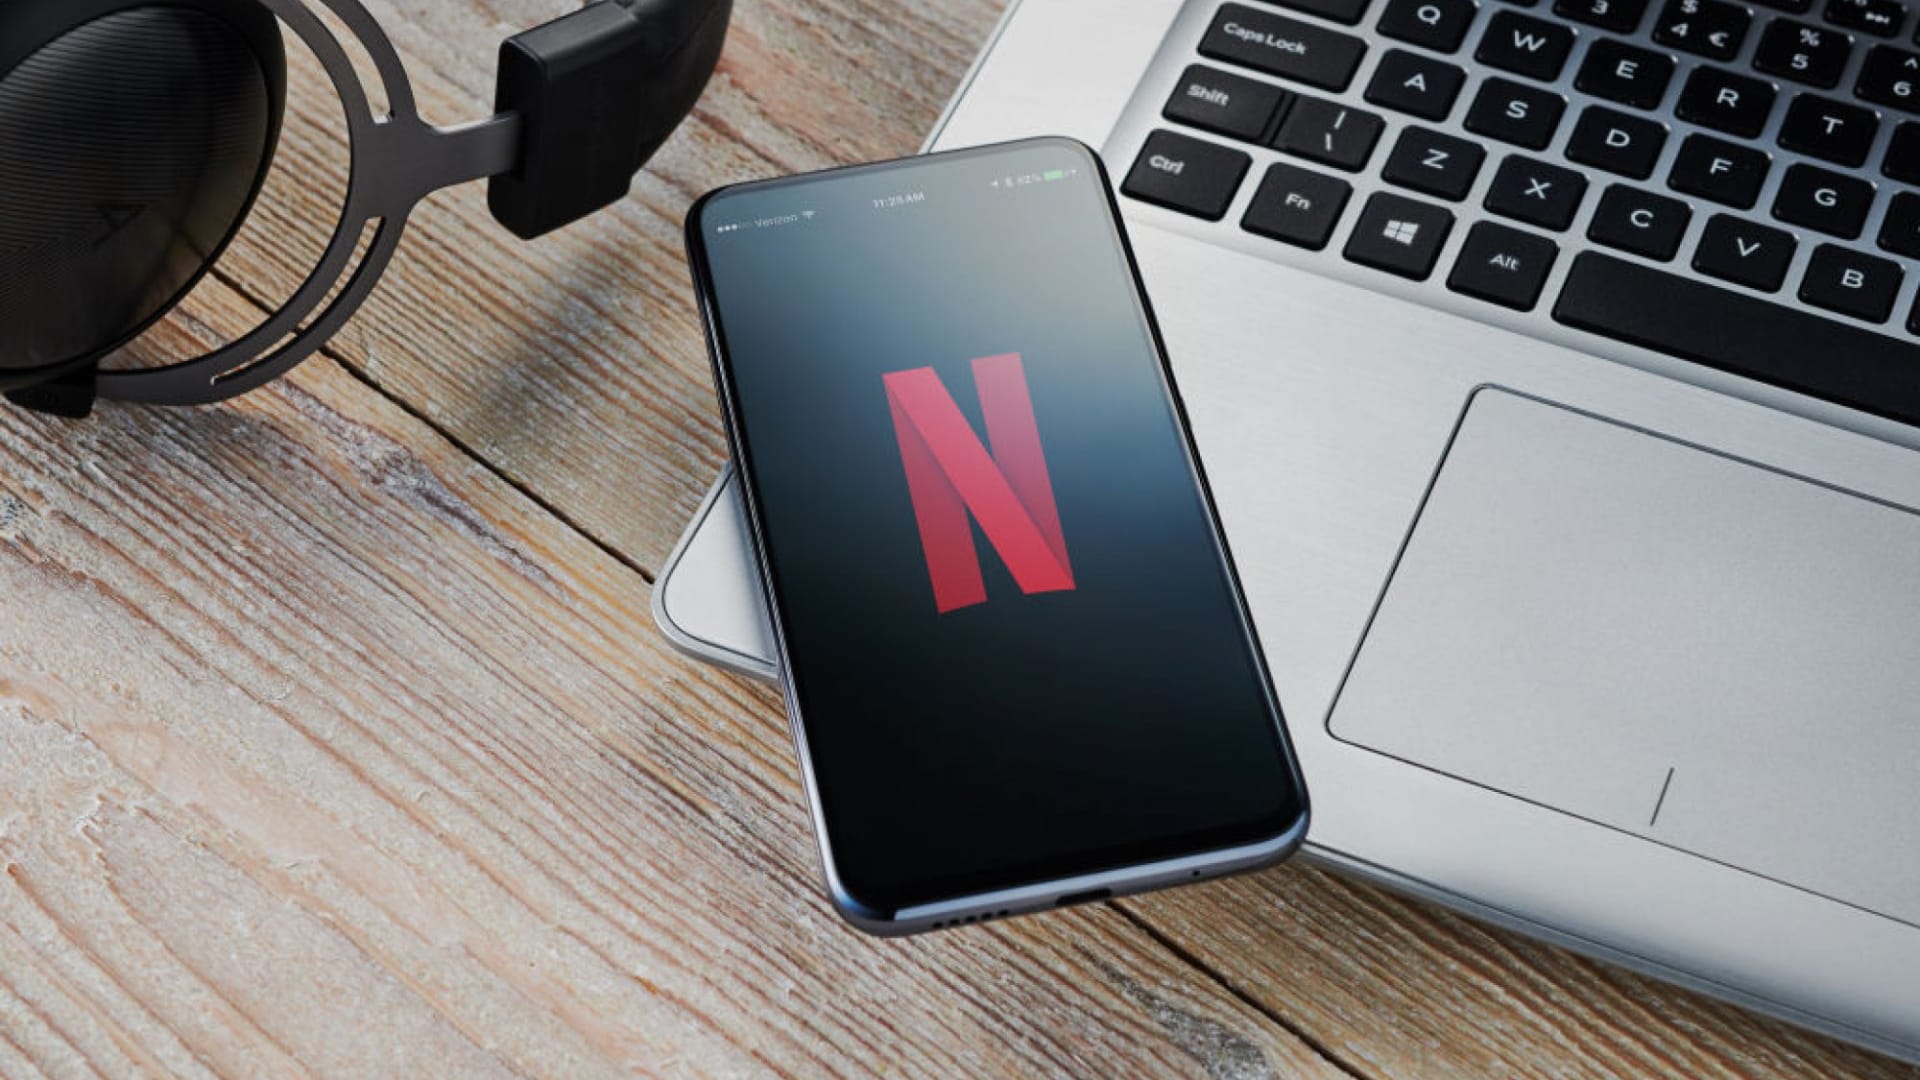 What Technology Stack Is Netflix Built On